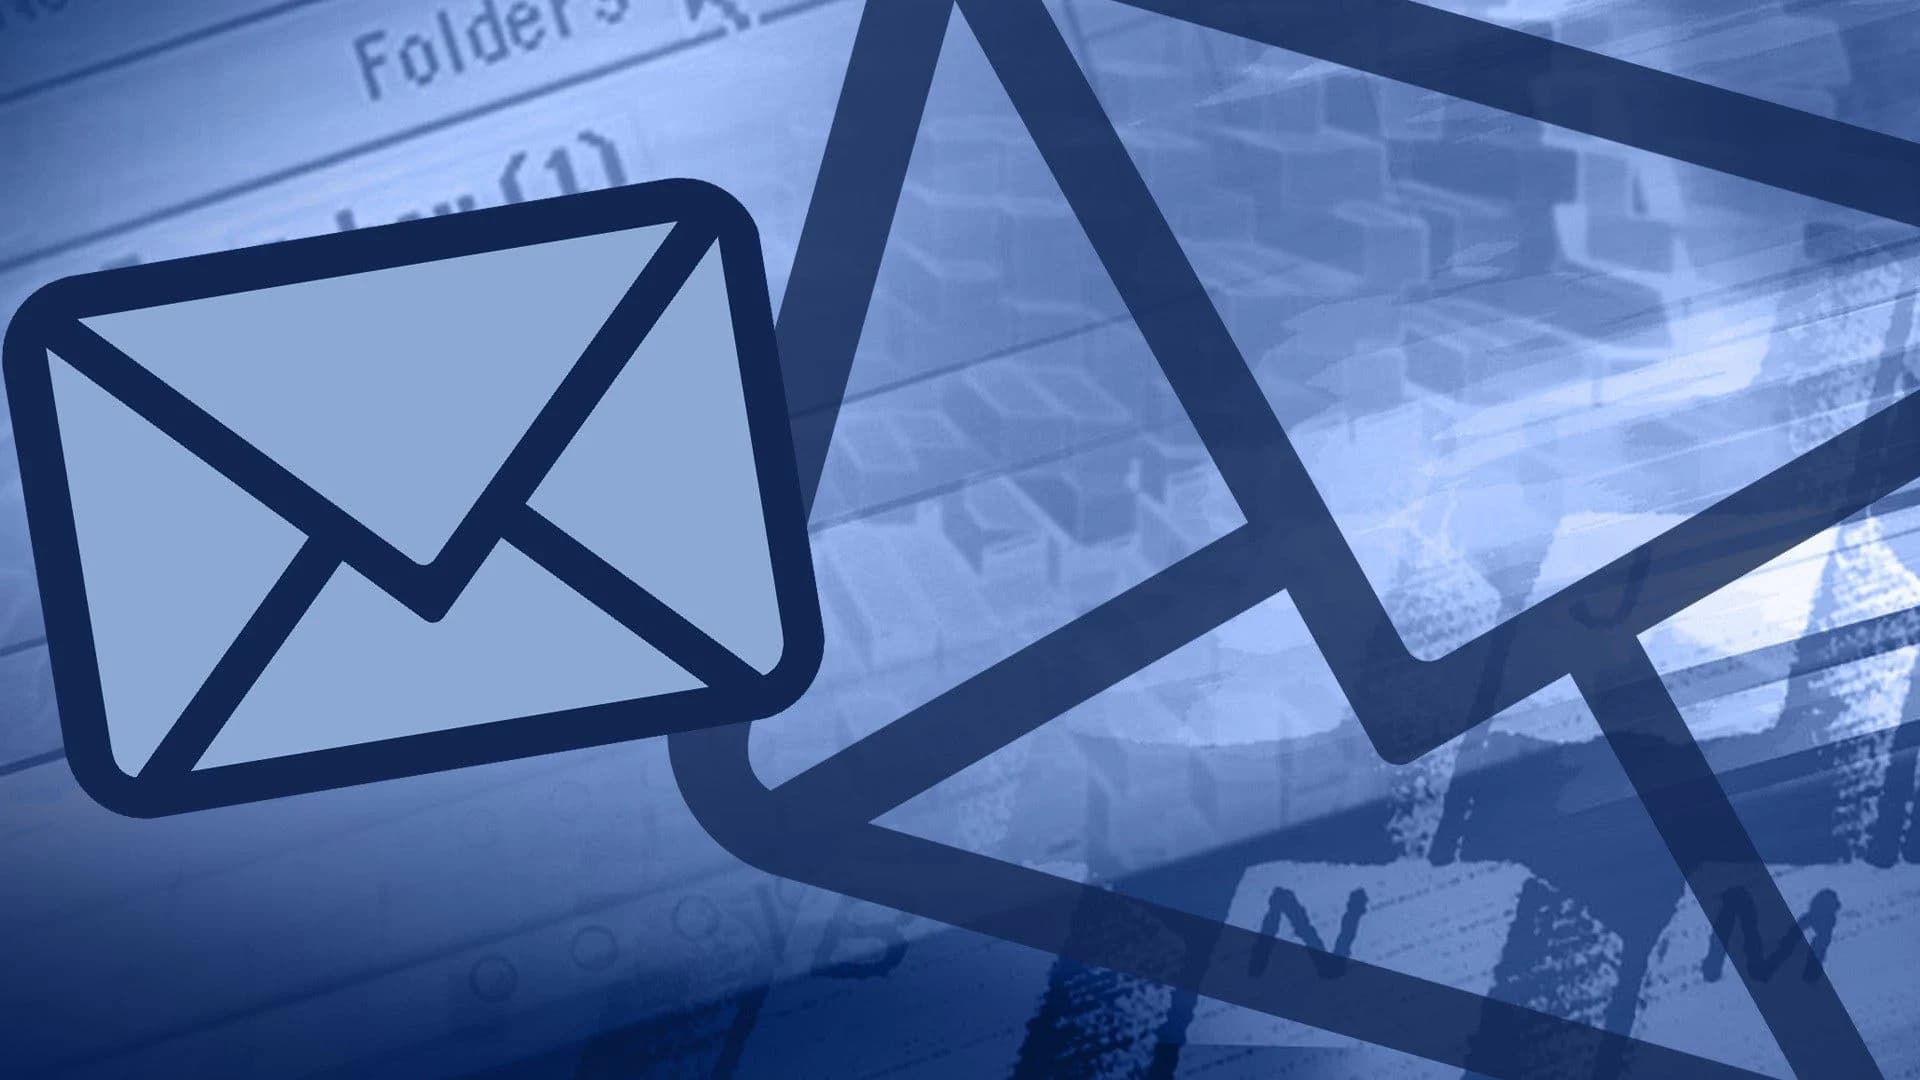 Experts: Unsafe to send confidential info by encrypted email